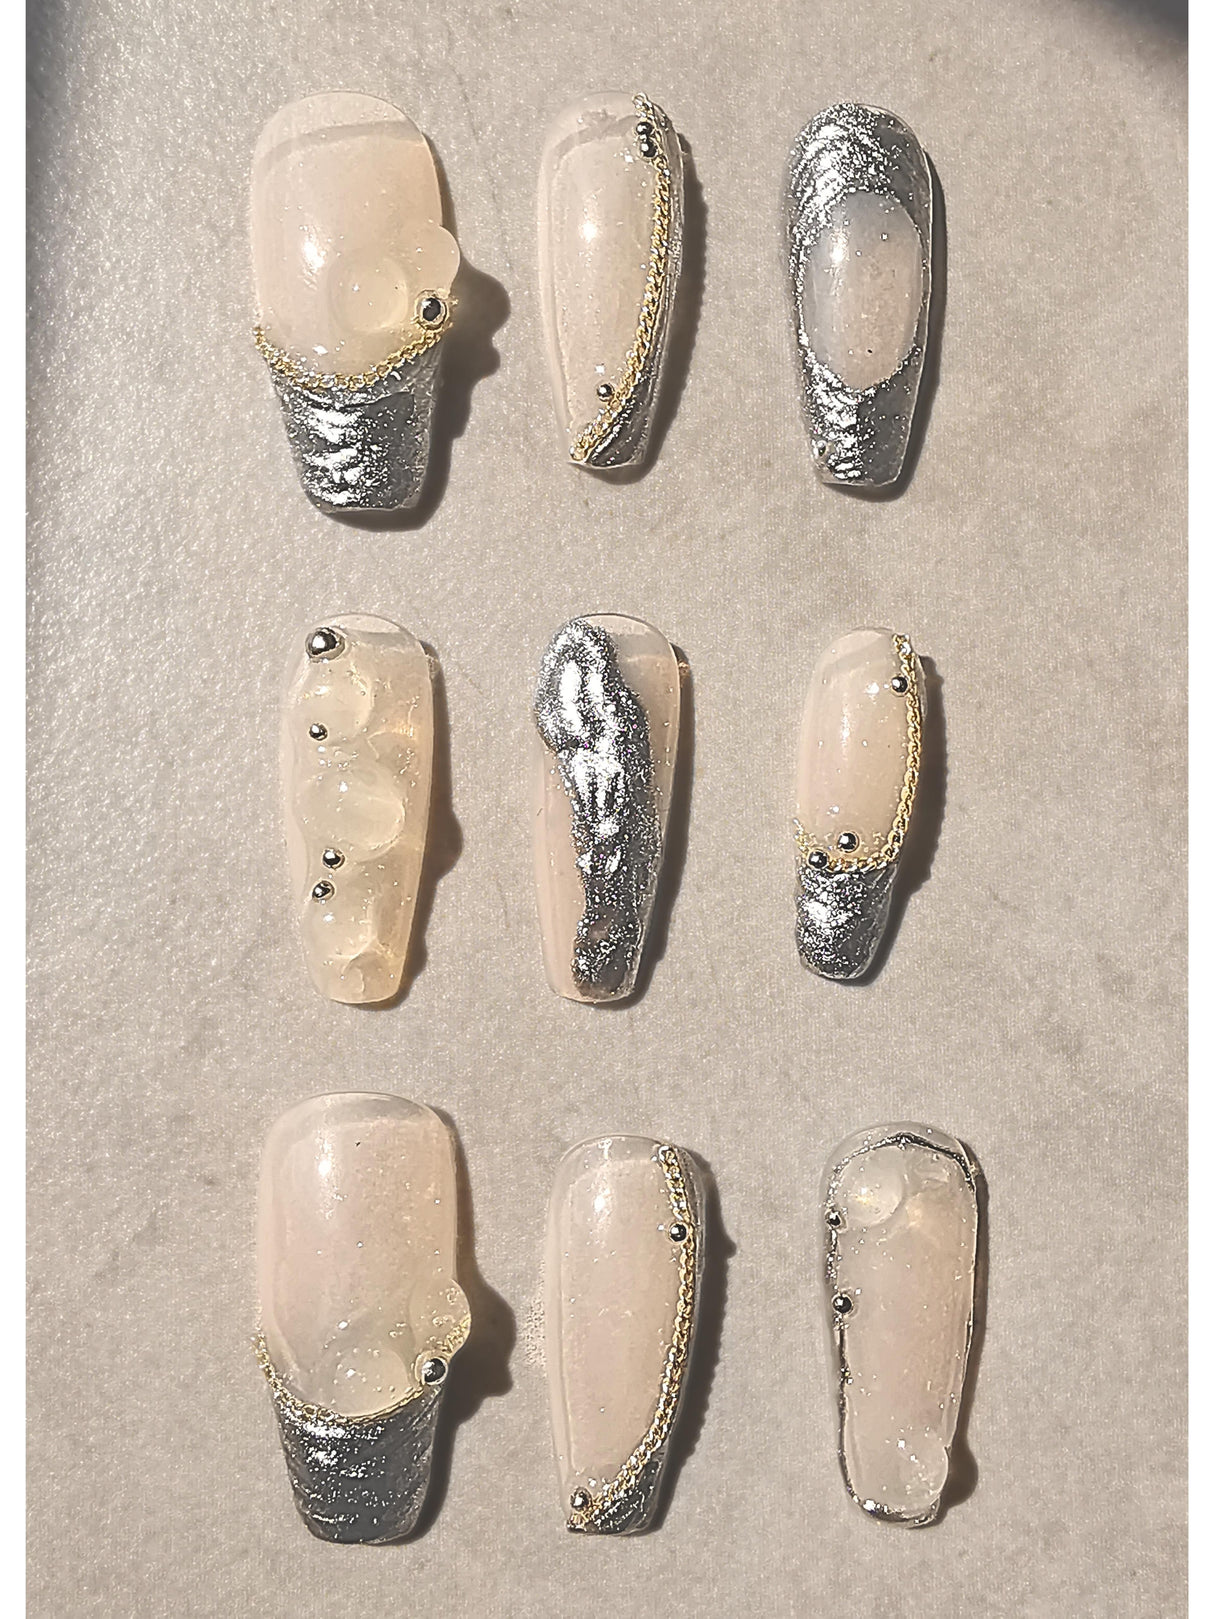 These press-on nails are designed for special occasions or fashion statements, with elaborate designs including accent features, embellishments, texture, unique shape, and glossy finish.